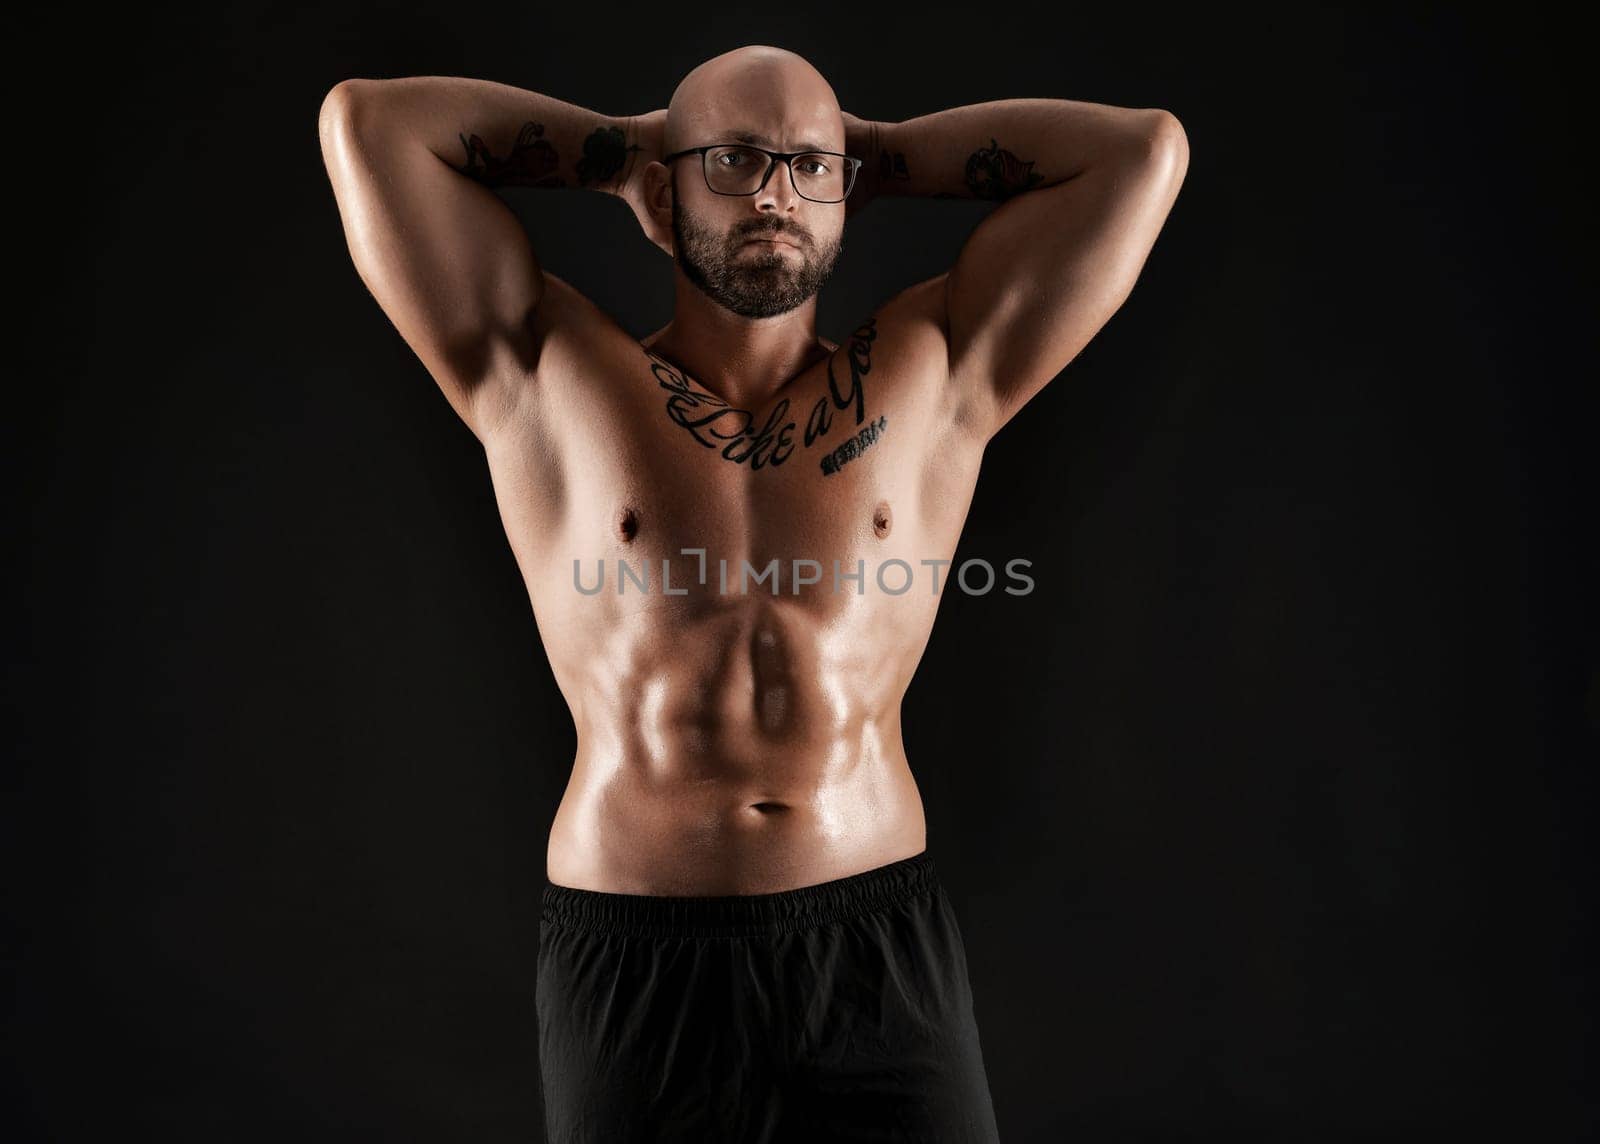 Good-looking bald, bearded, tattooed guy in black shorts is demonstating his muscles while posing against a black background and looking at the camera. Chic muscular body, fitness, gym, healthy lifestyle concept. Close-up portrait.